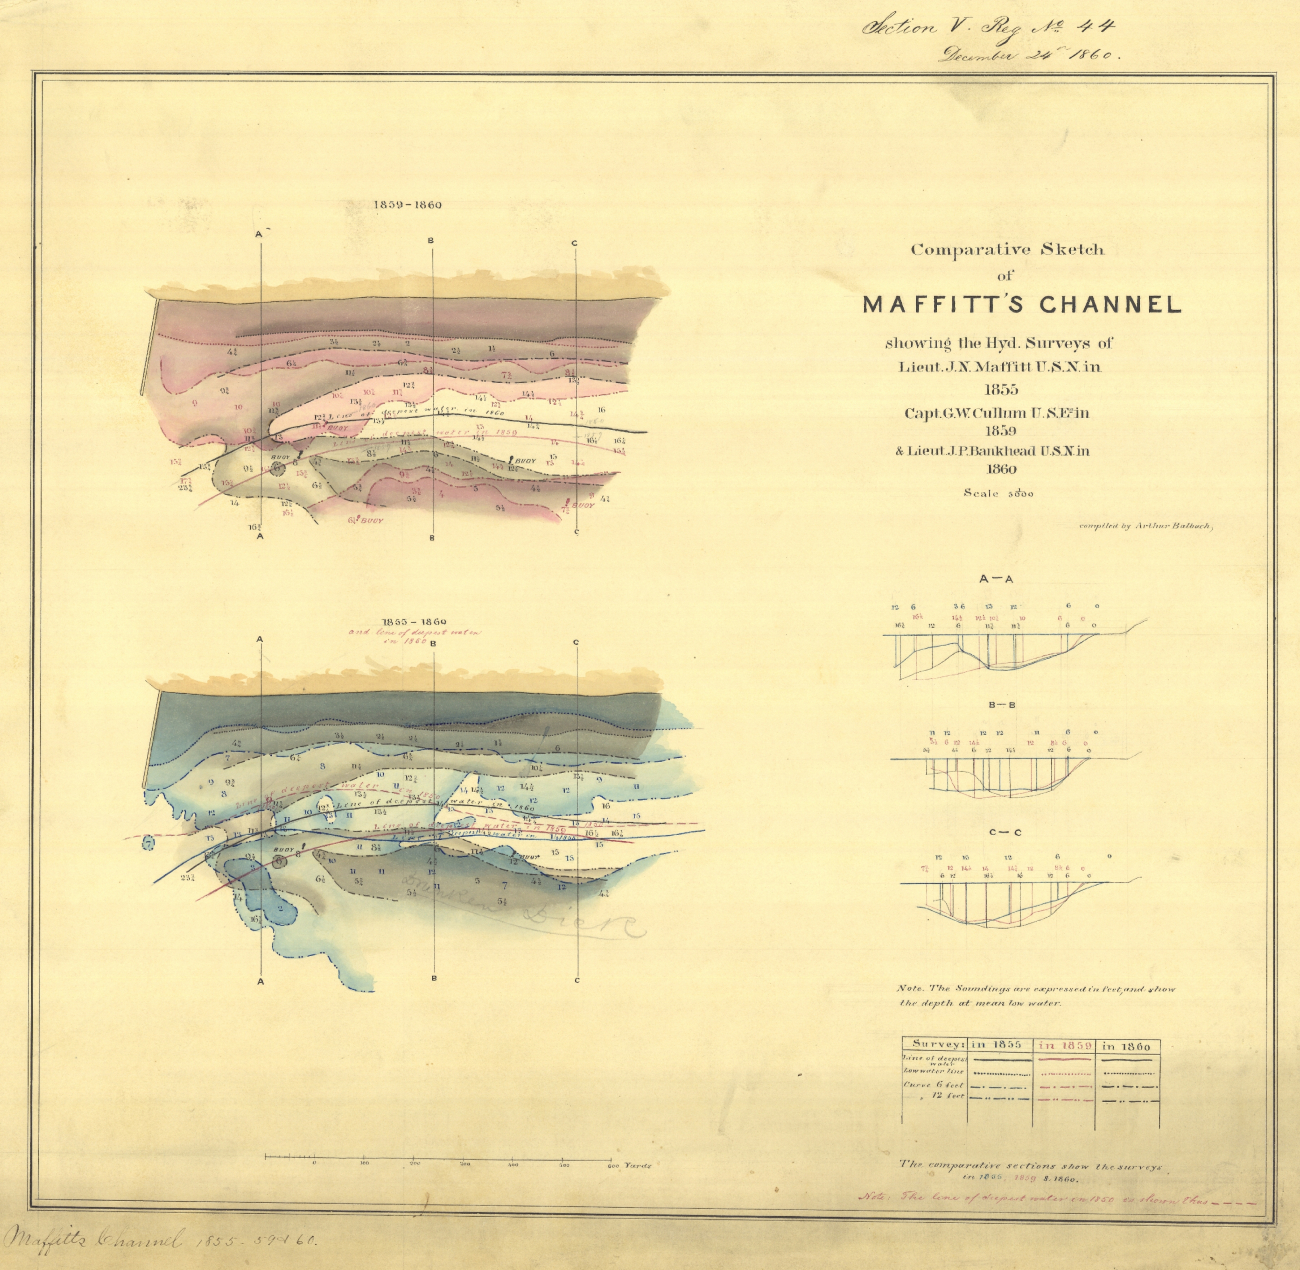 Comparative Sketch of Maffitt's Channel, showing the Hydrographic Surveys ofLieut